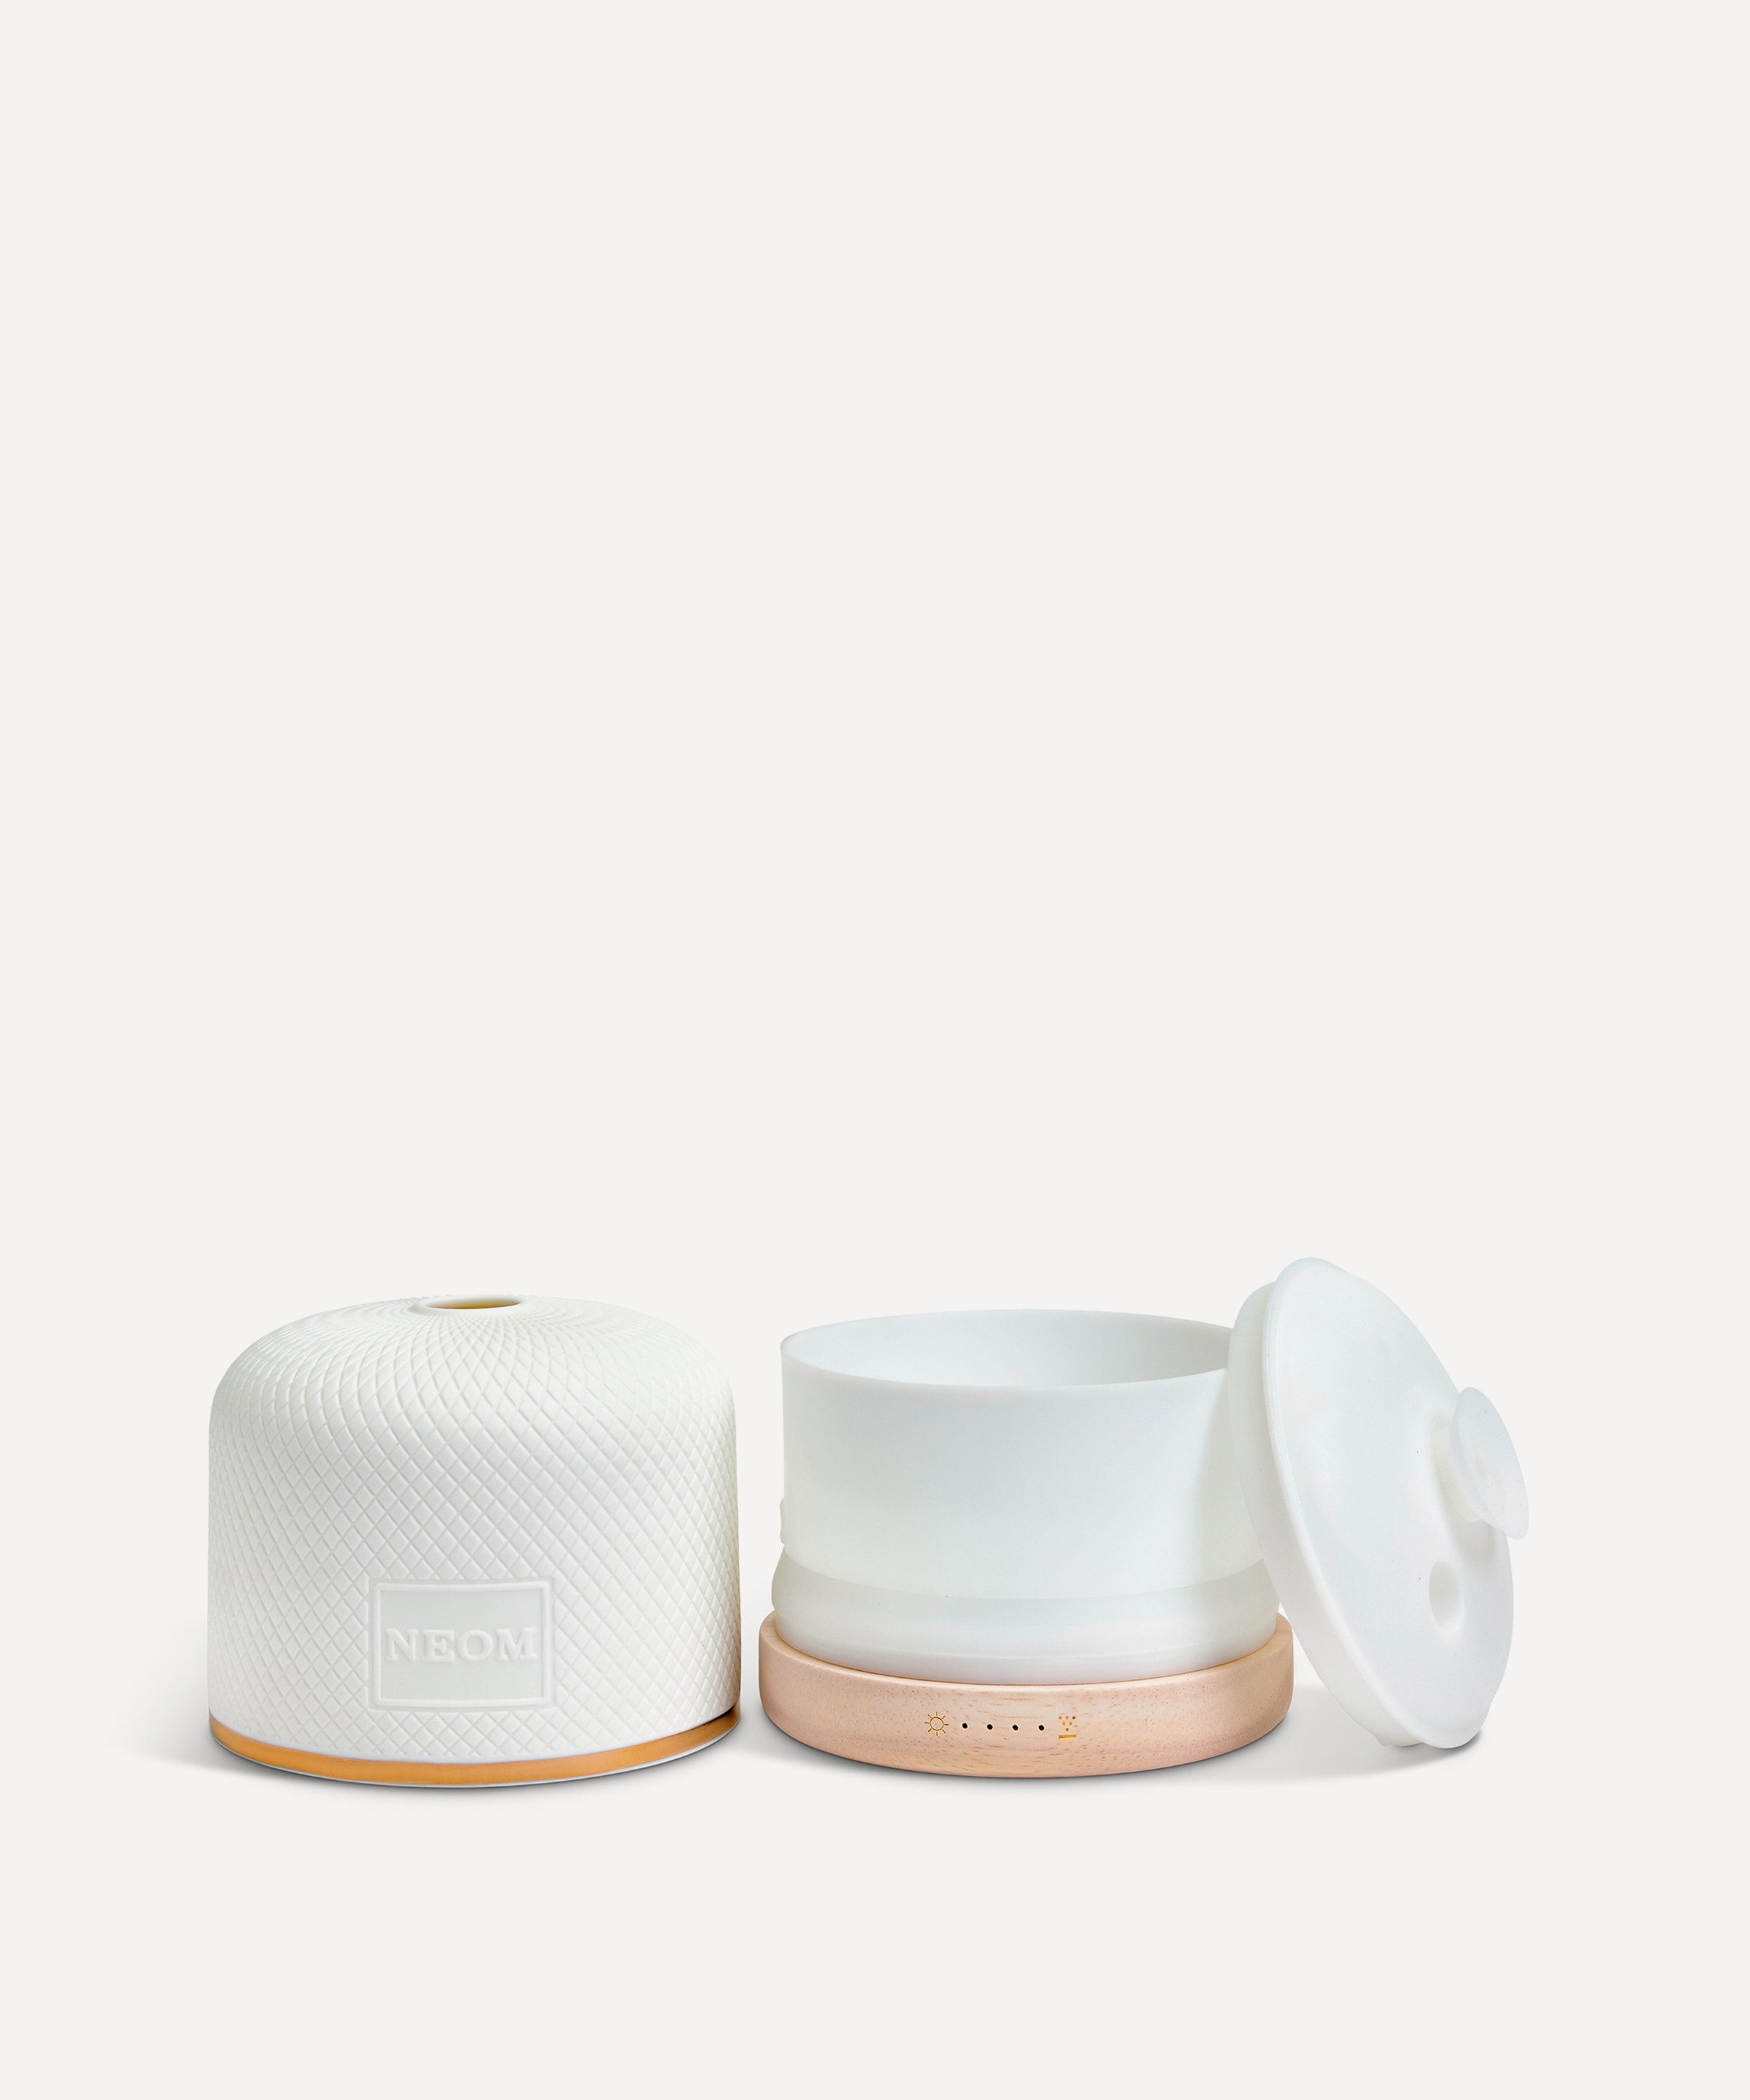 NEOM Organics - Wellbeing Pod Luxe image number 1